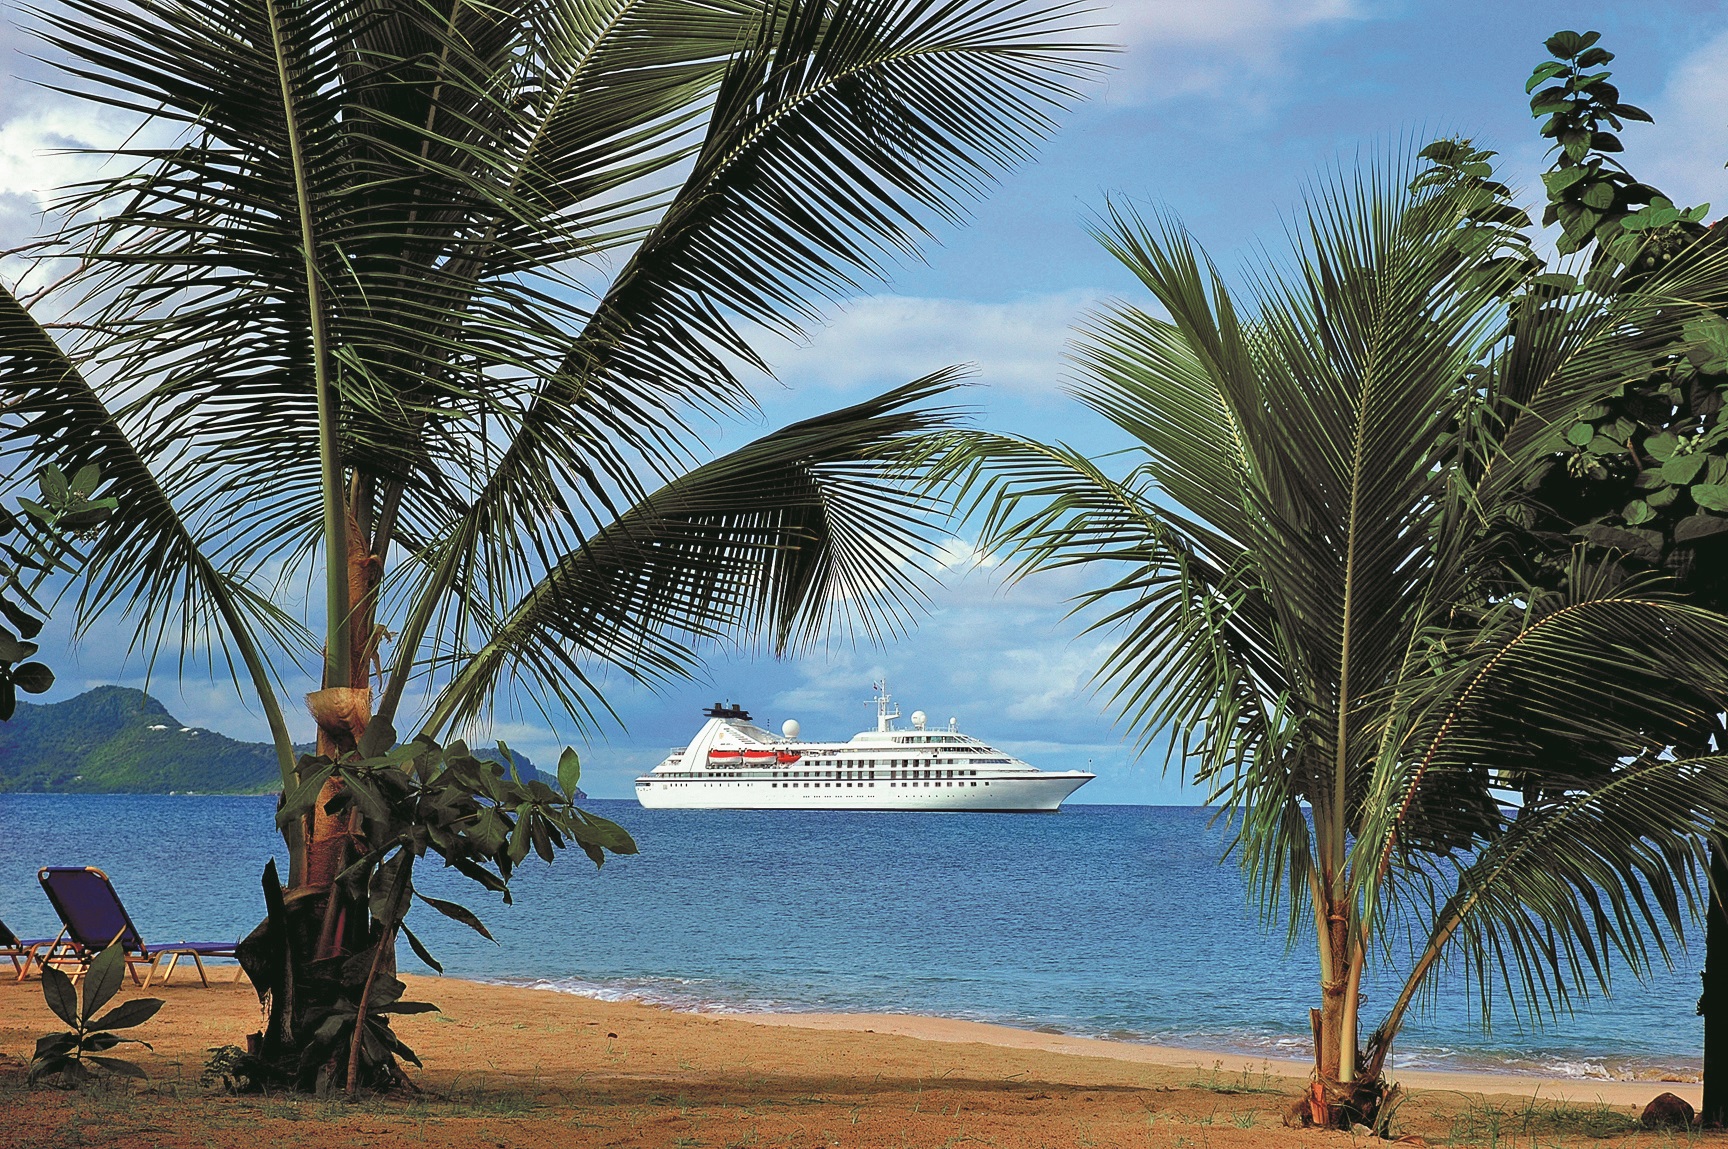 Exterior view of Star Pride beyond palm trees in Mayreau